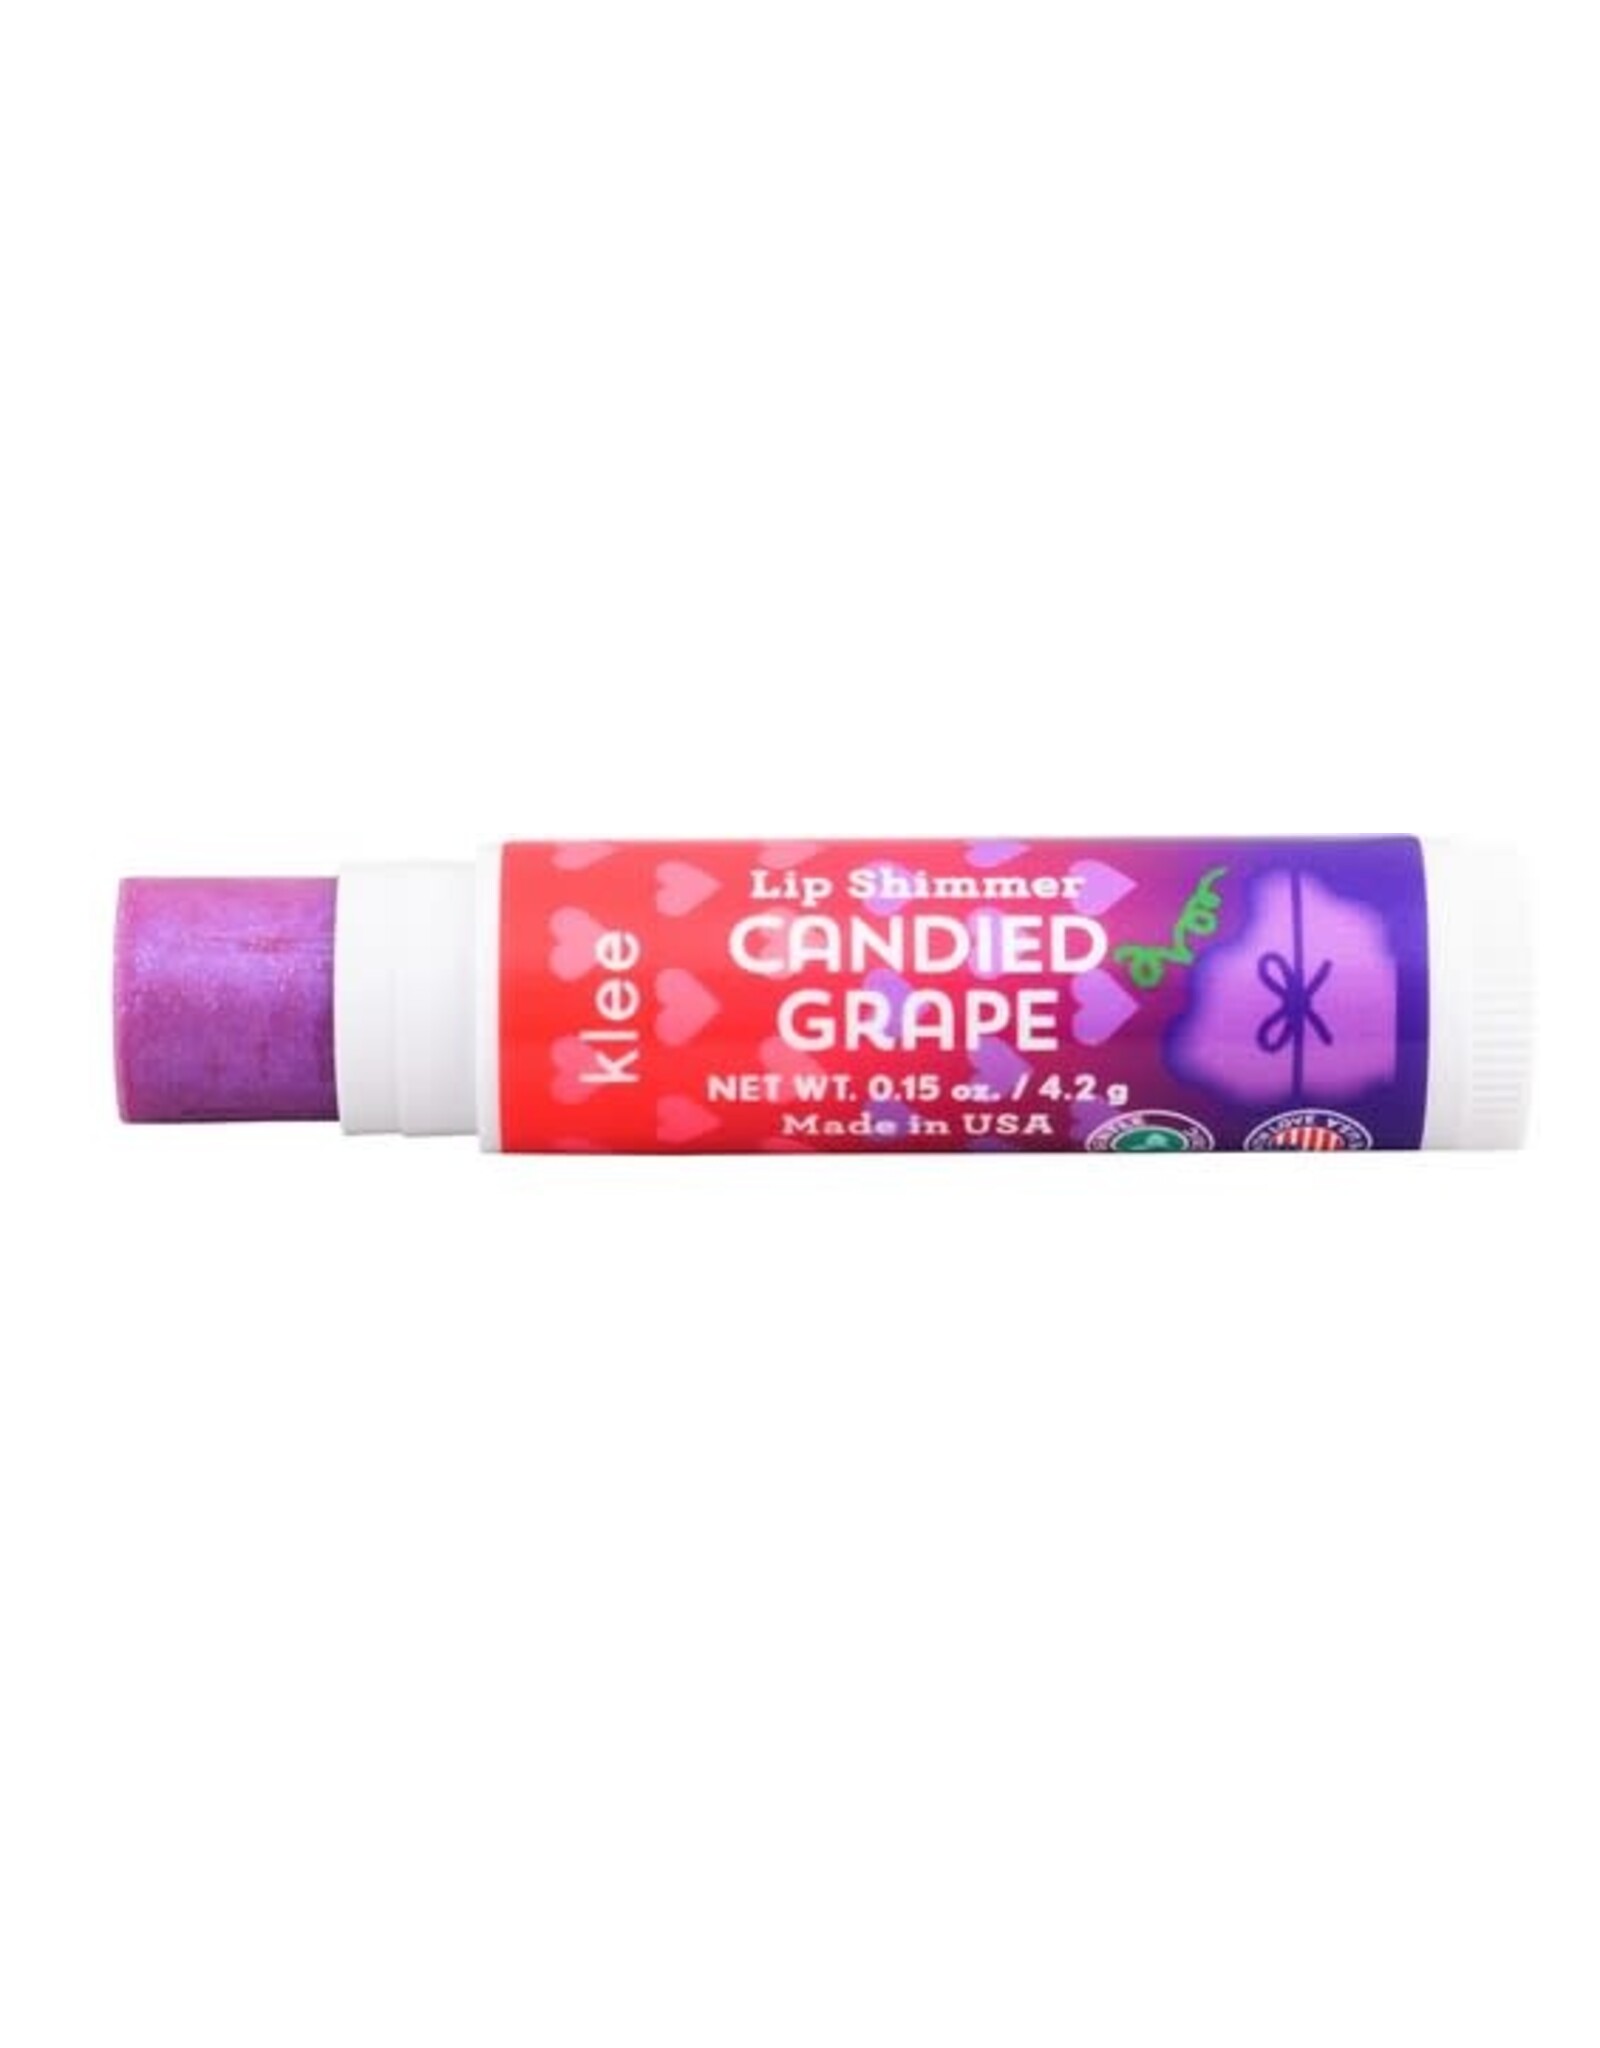 Klee Naturals/Easy A Lip Shimmer - Candied Grape